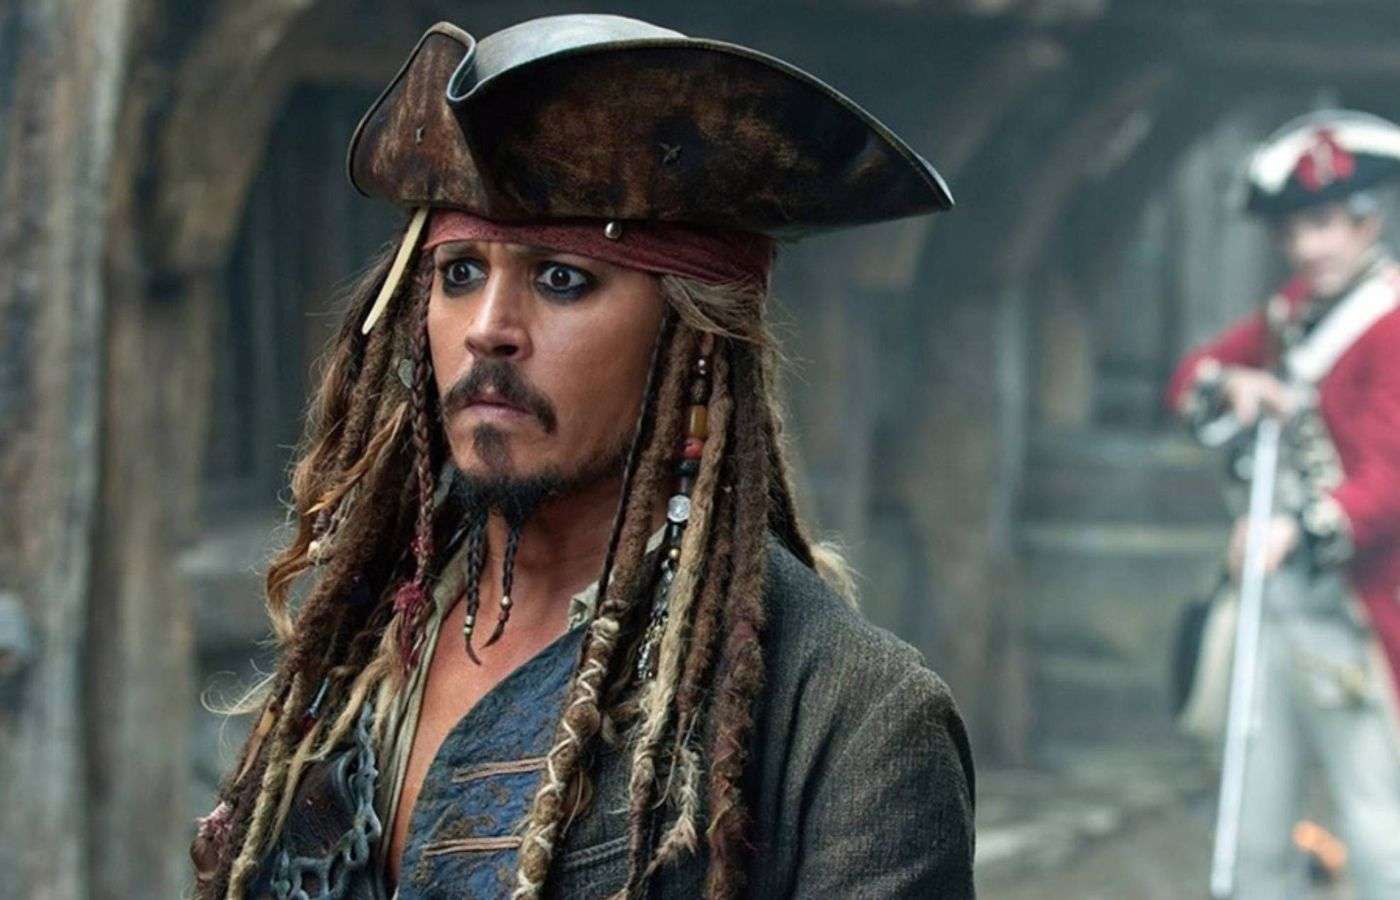 Johnny Depp in Pirates of the Carribean